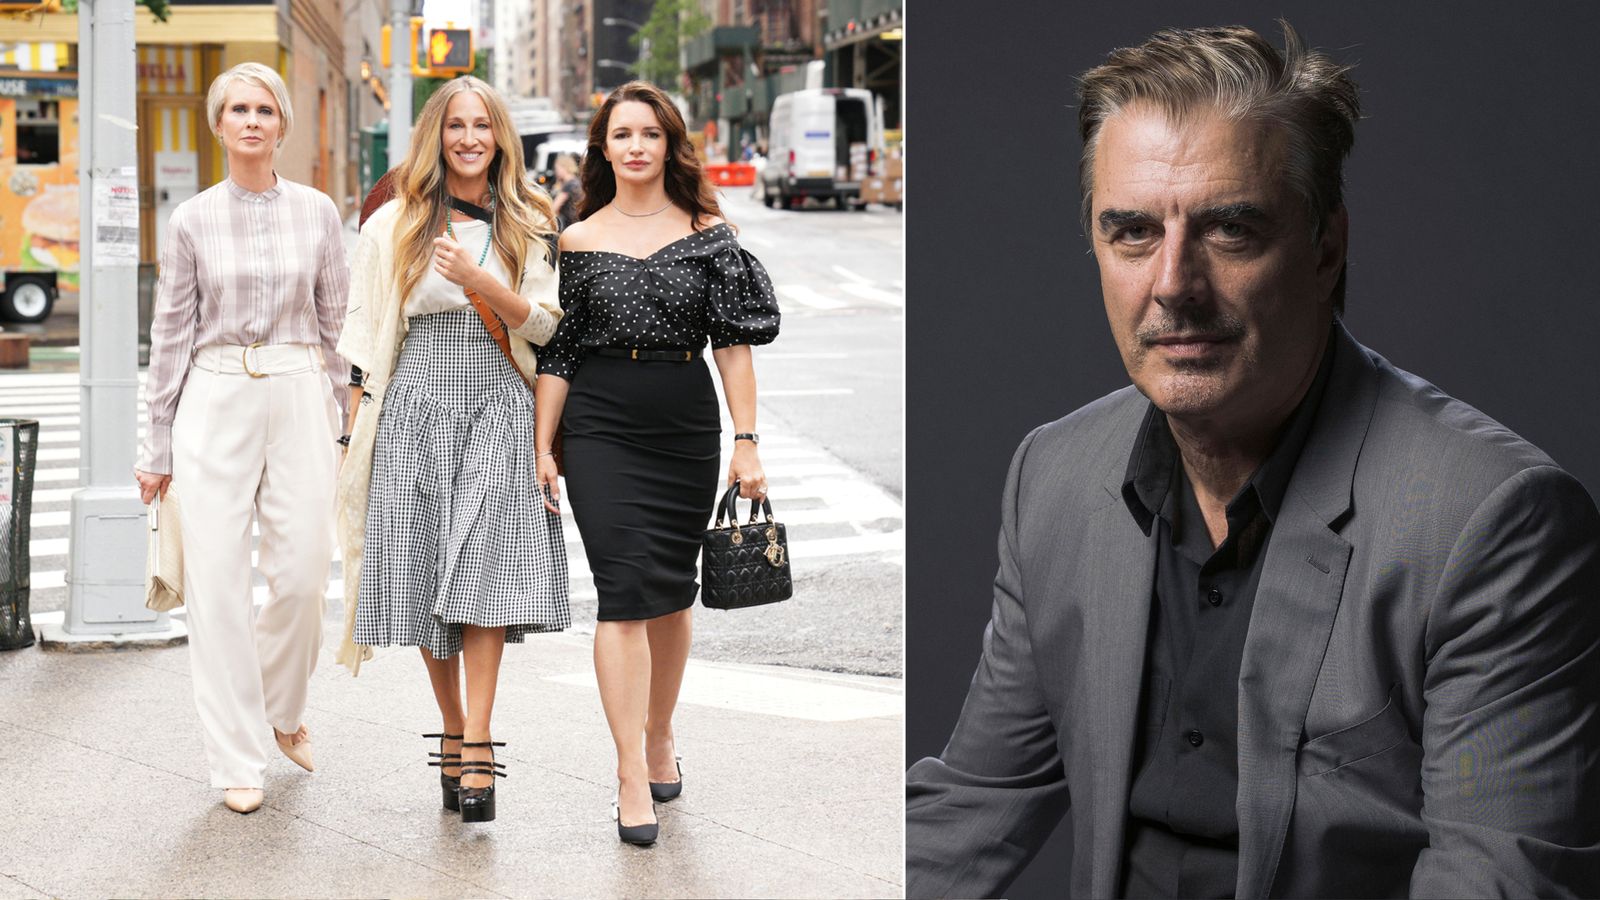 Chris Noth Sex And The City Stars Break Silence Over Sexual Assault Allegations As Universal 2368